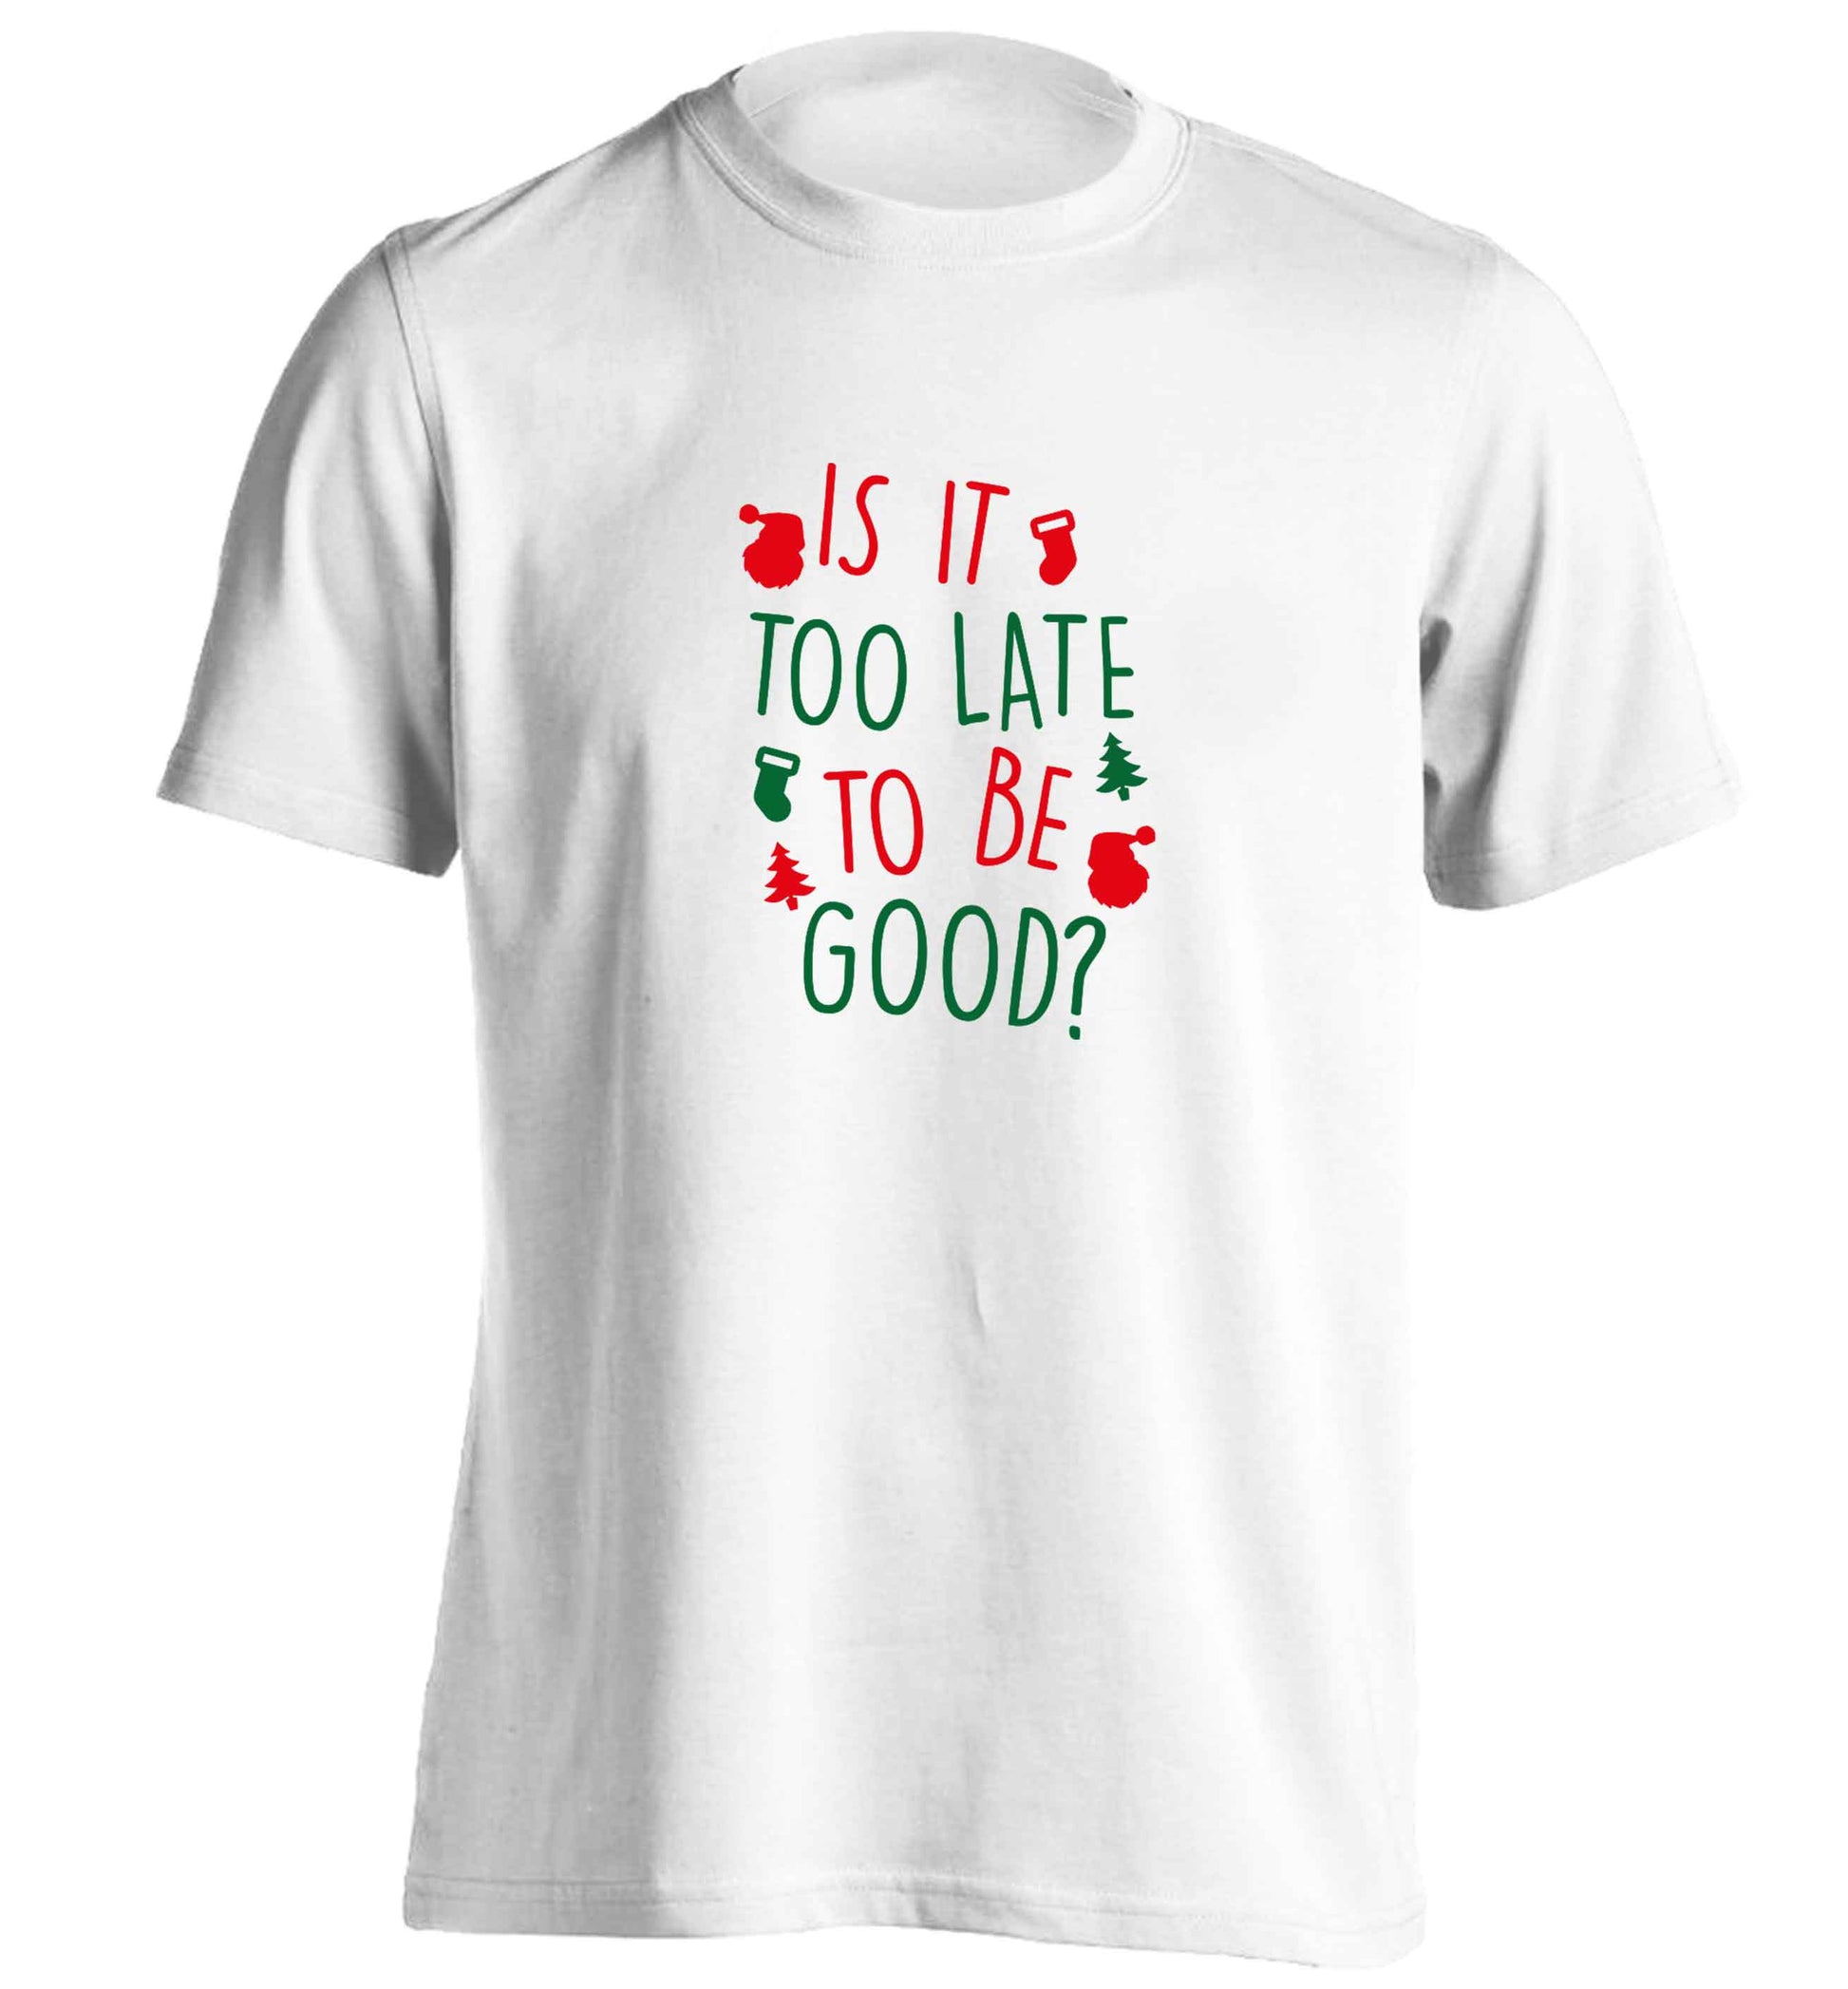 Too Late to be Good adults unisex white Tshirt 2XL